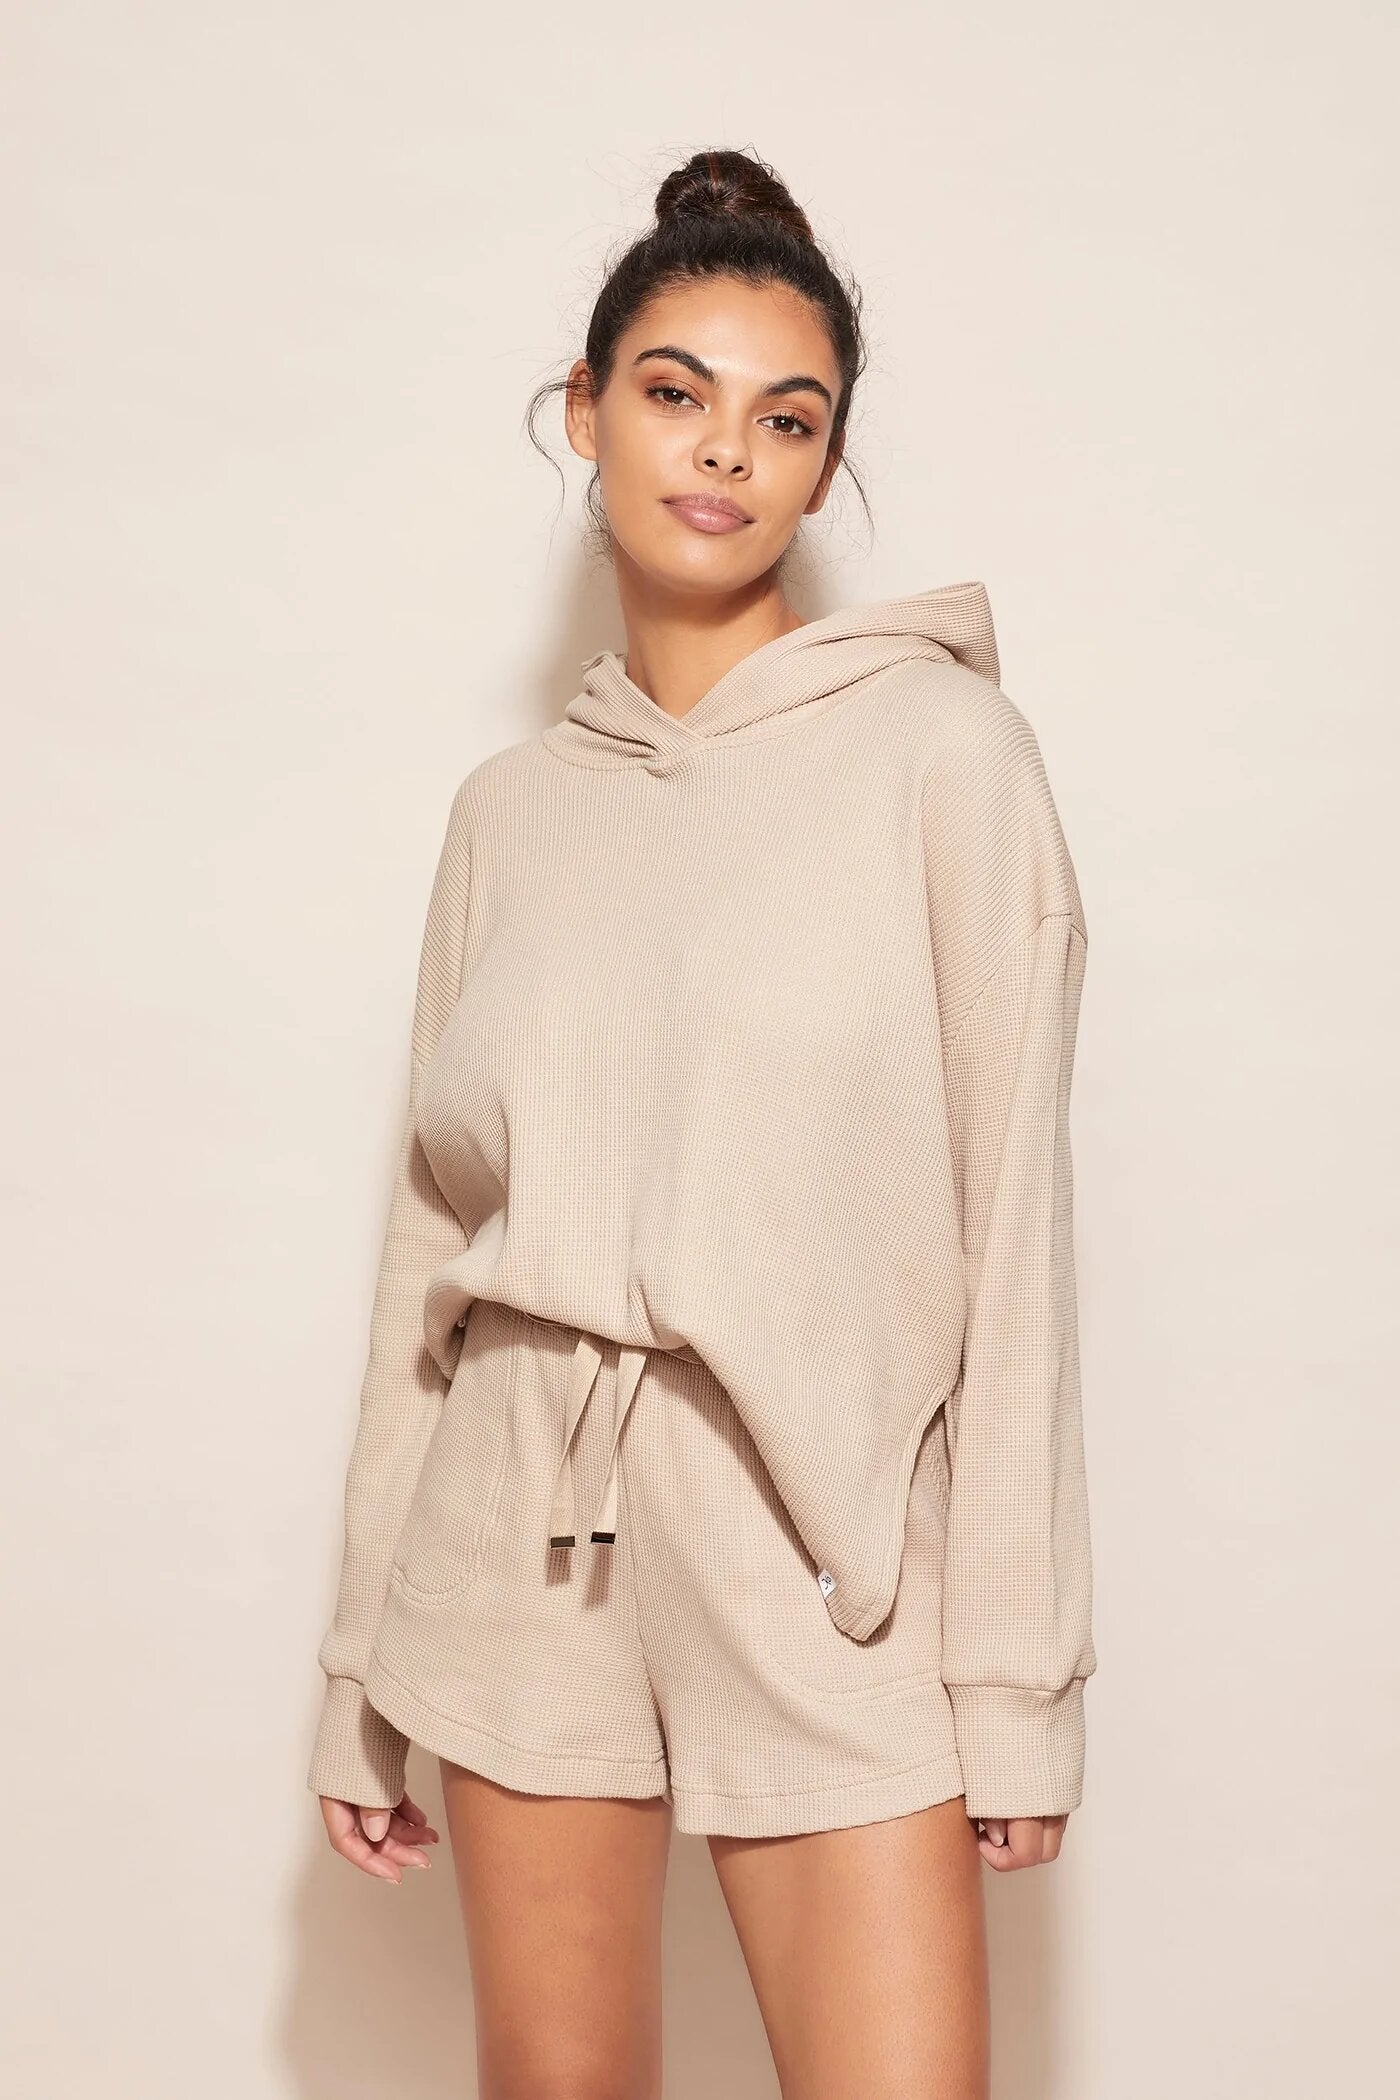 8 Sustainable Loungewear Brands For Guilt-Free Comfort